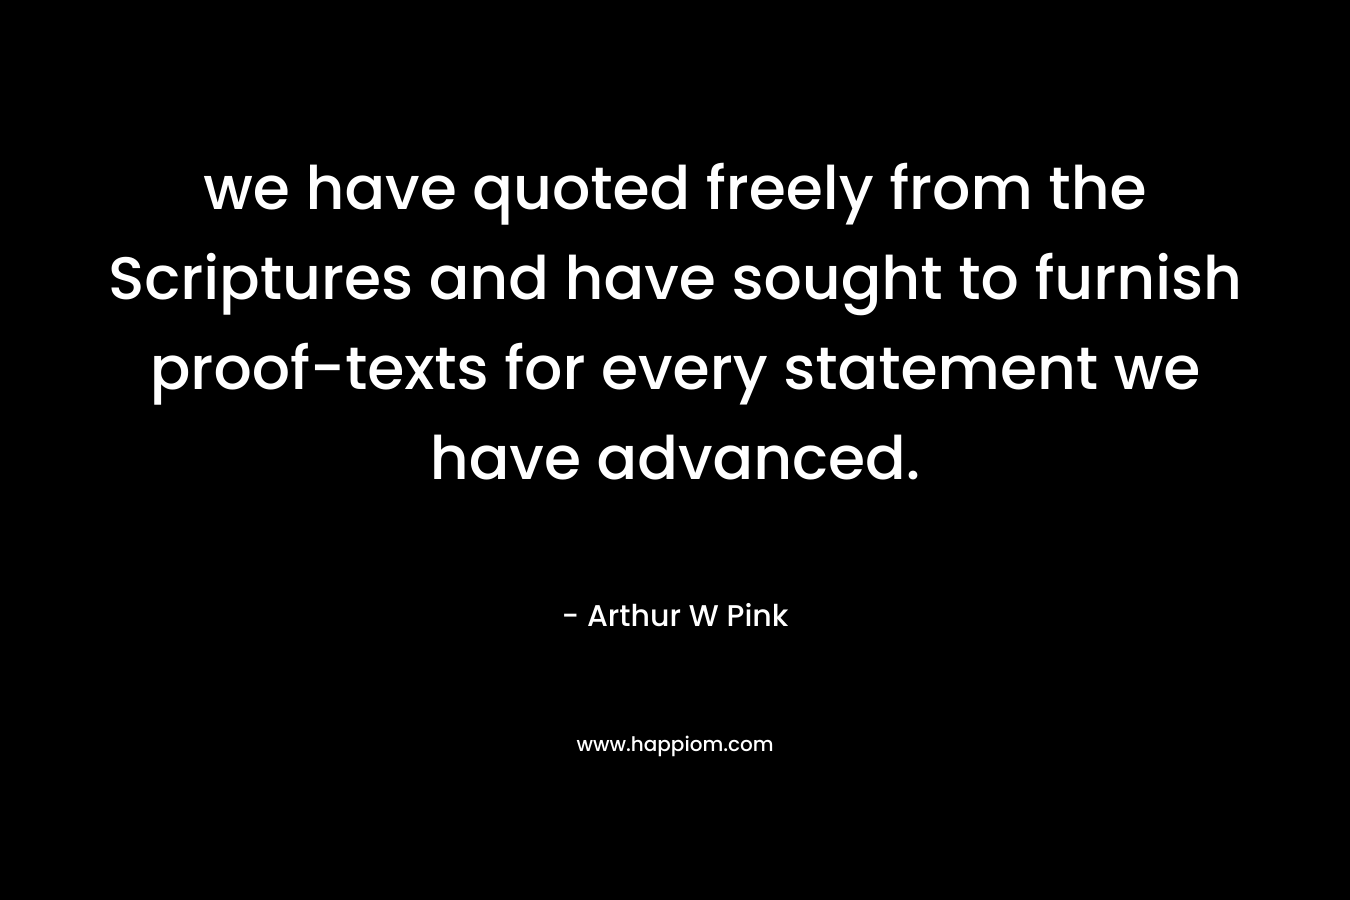 we have quoted freely from the Scriptures and have sought to furnish proof-texts for every statement we have advanced. – Arthur W Pink